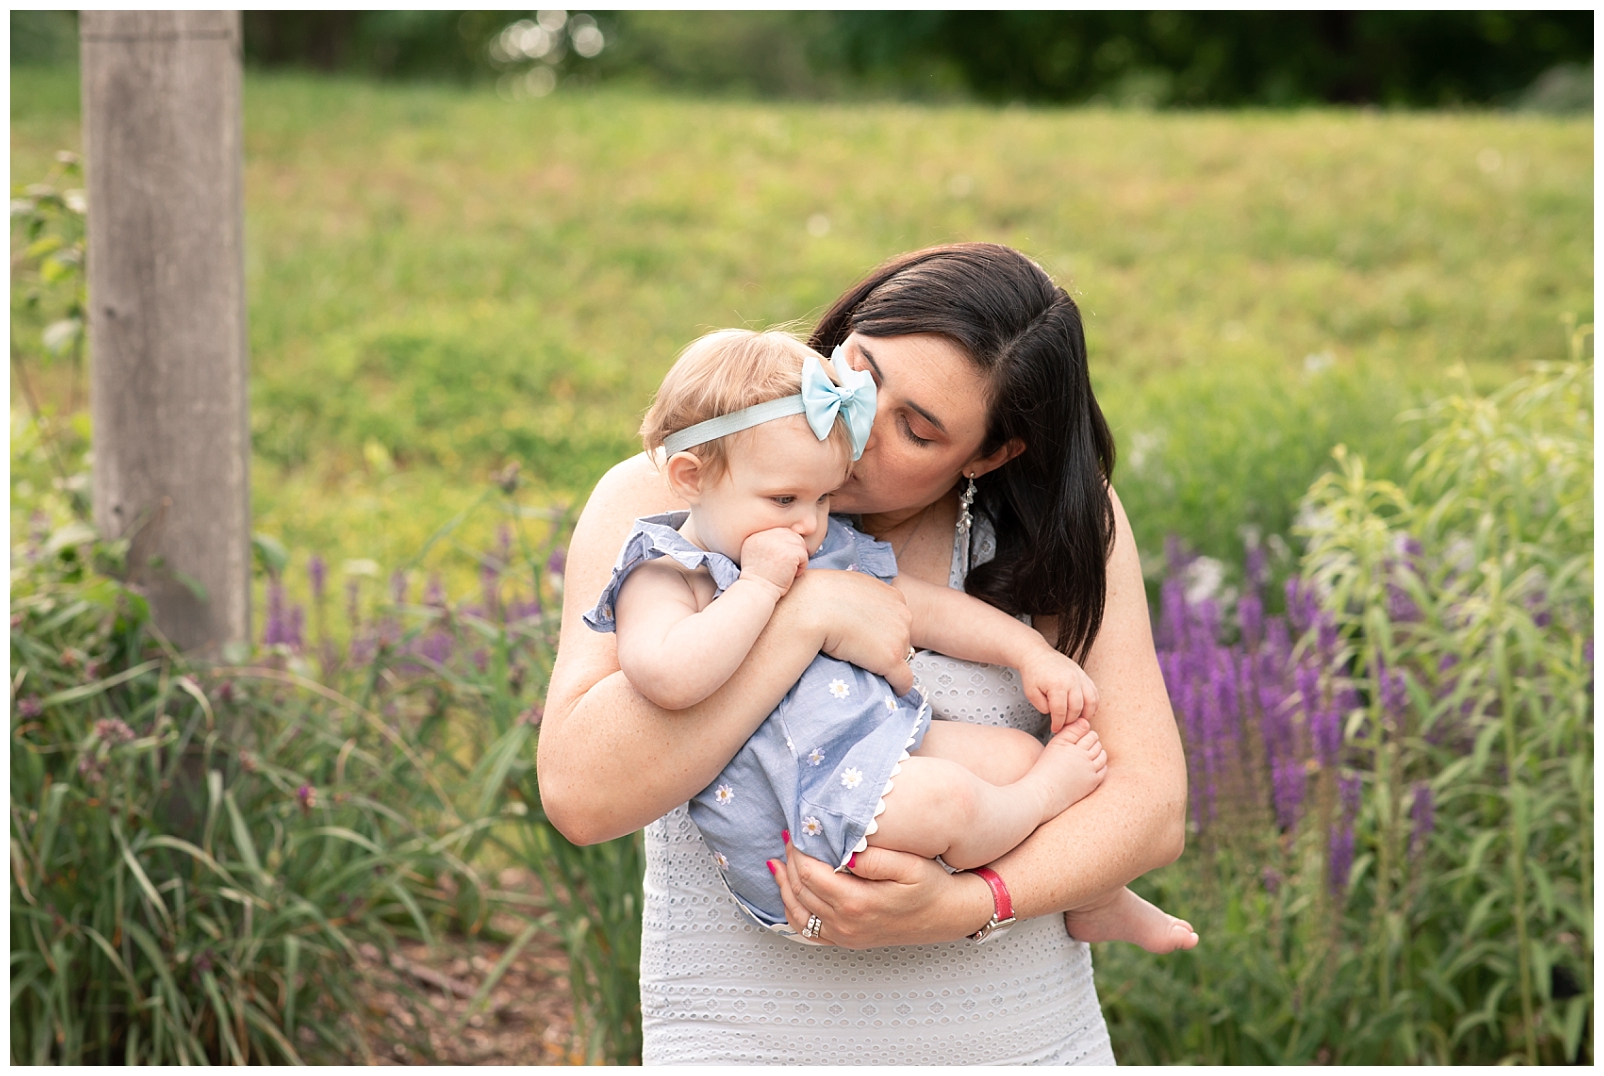 Mom holding daughter near a stone wall with purple flowers